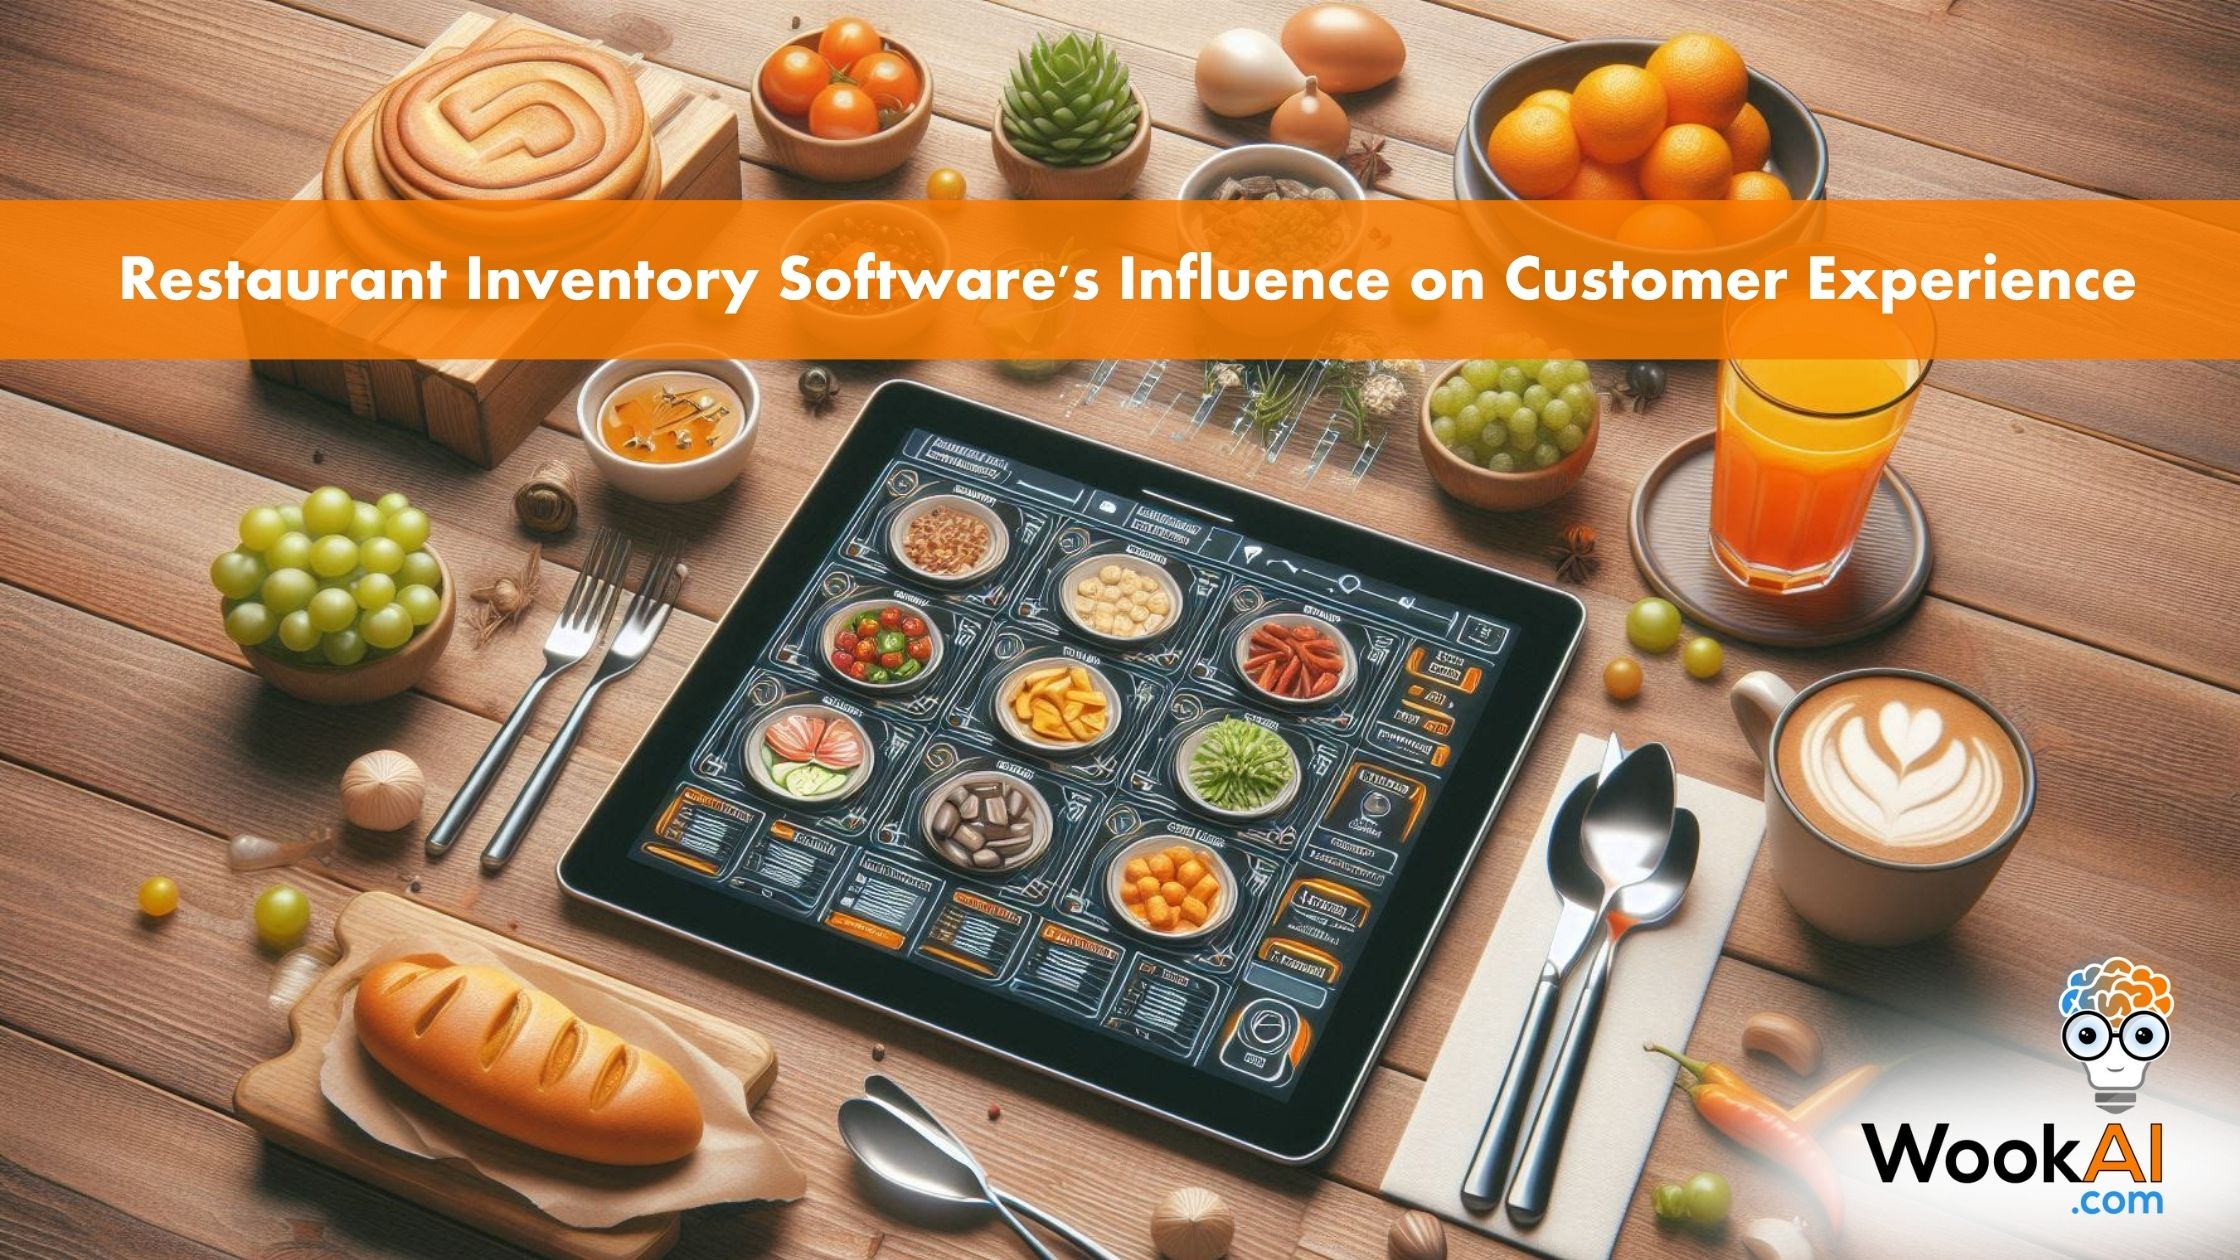 Restaurant Inventory Software’s Influence on Customer Experience